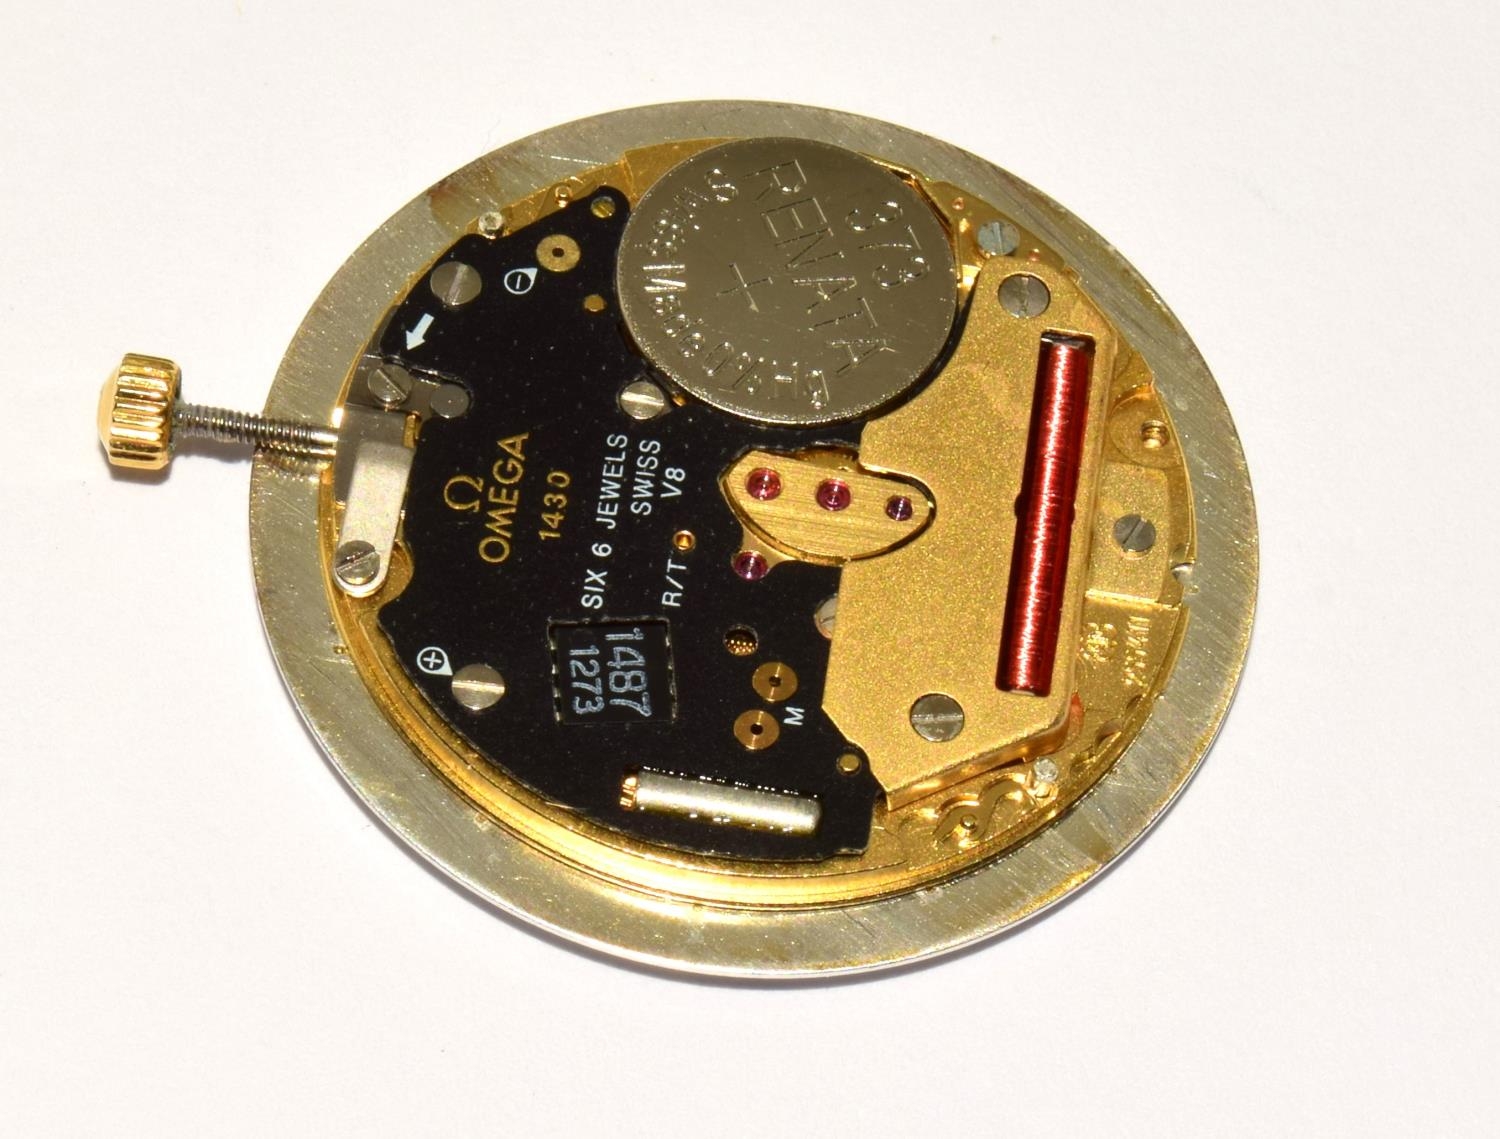 Omega 1430 watch movement working, removed from an 18ct gold gents watch with retaining ring. - Image 3 of 4